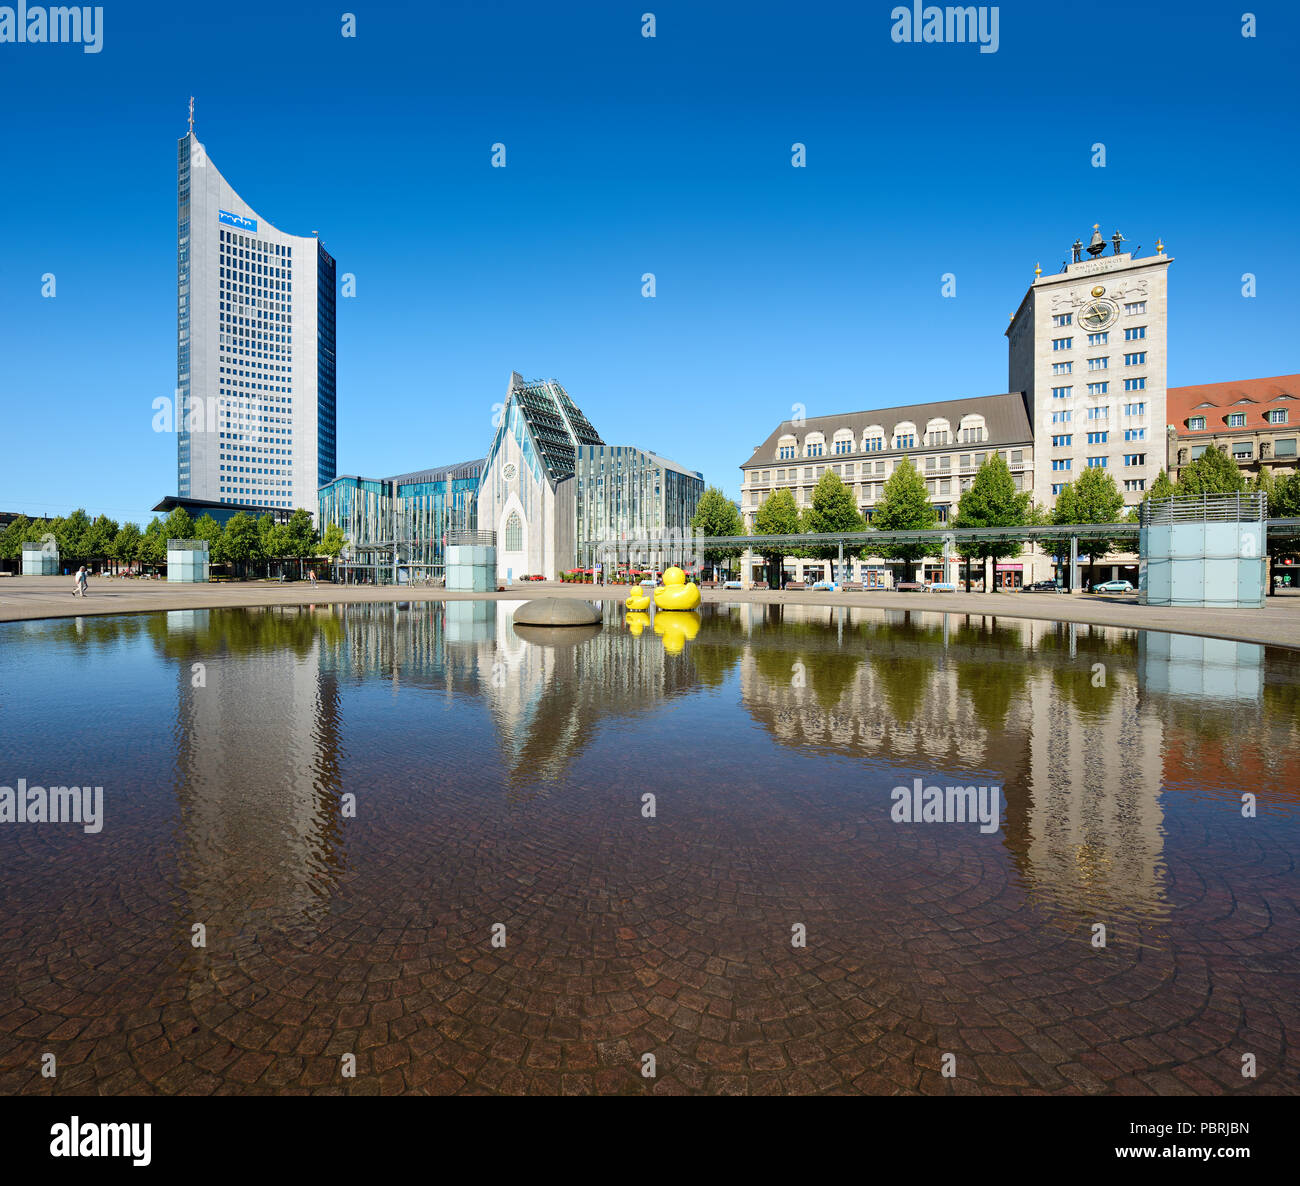 Augustus Square, City highrise, Augusteum and Paulinum of the university, Kroch highrise, water reflection in water basin Stock Photo